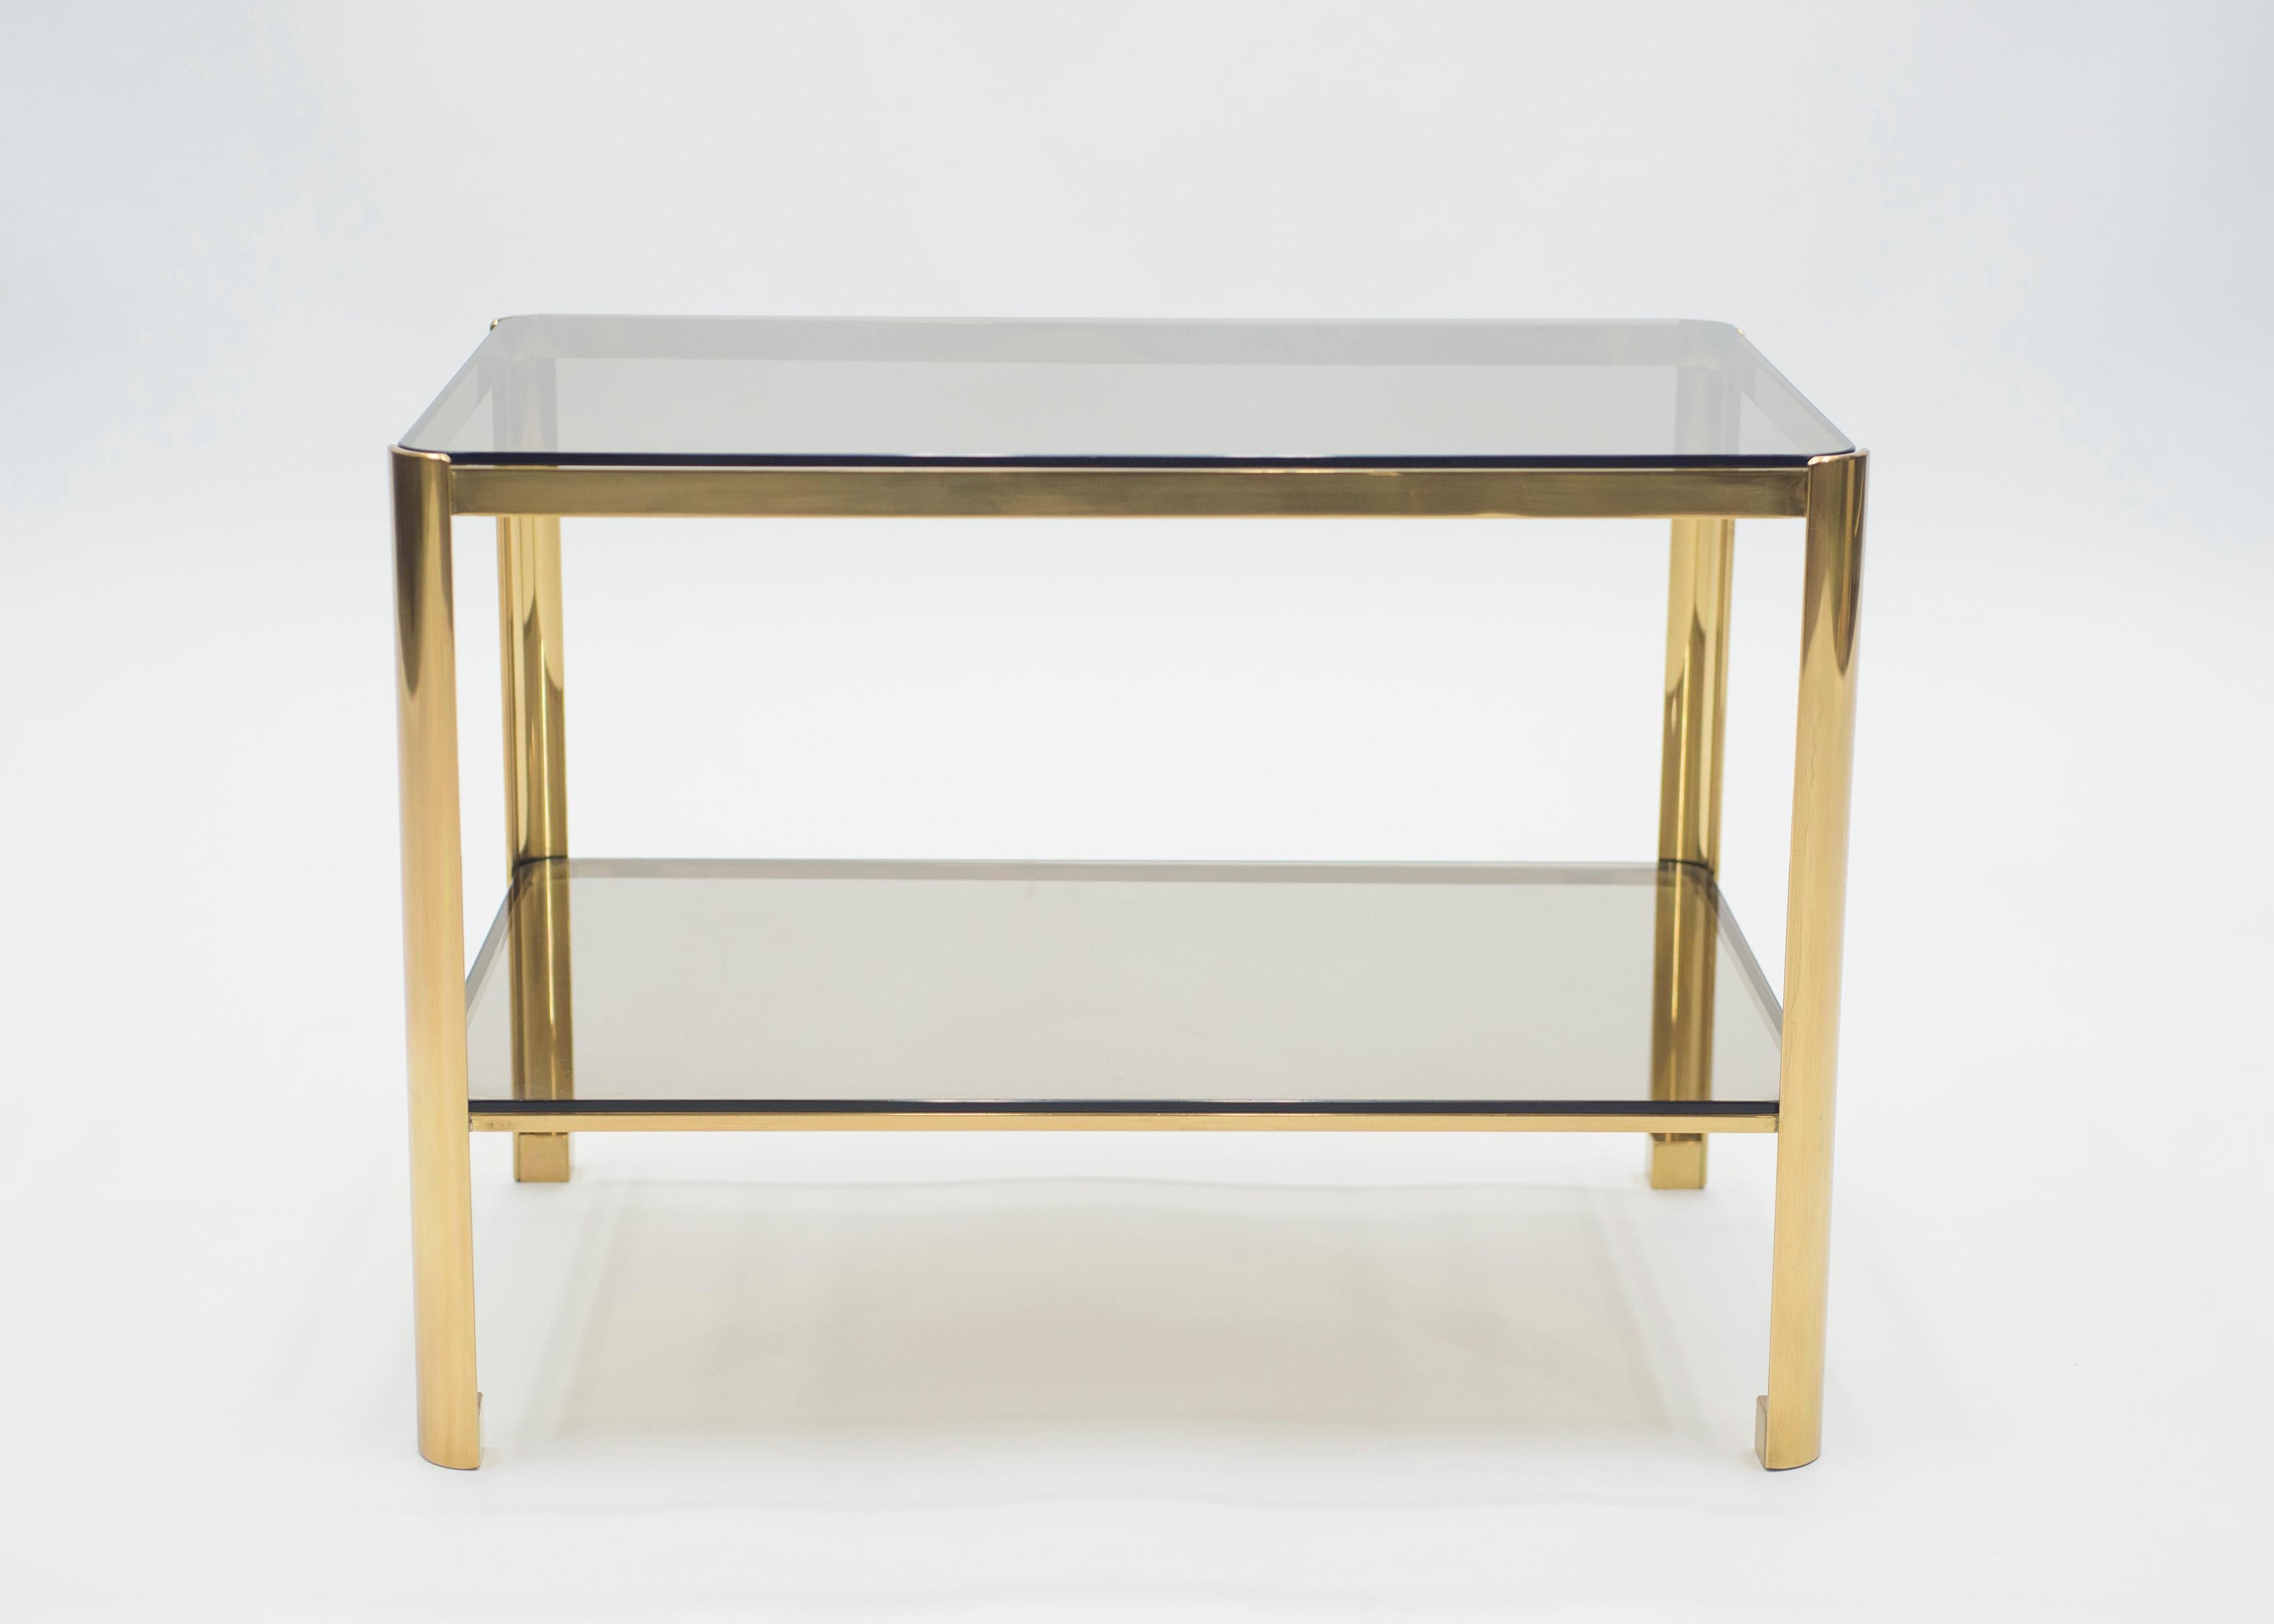 French Bronze Occasional Side Table by Jacques Quinet for Broncz, 1960s (Moderne der Mitte des Jahrhunderts)